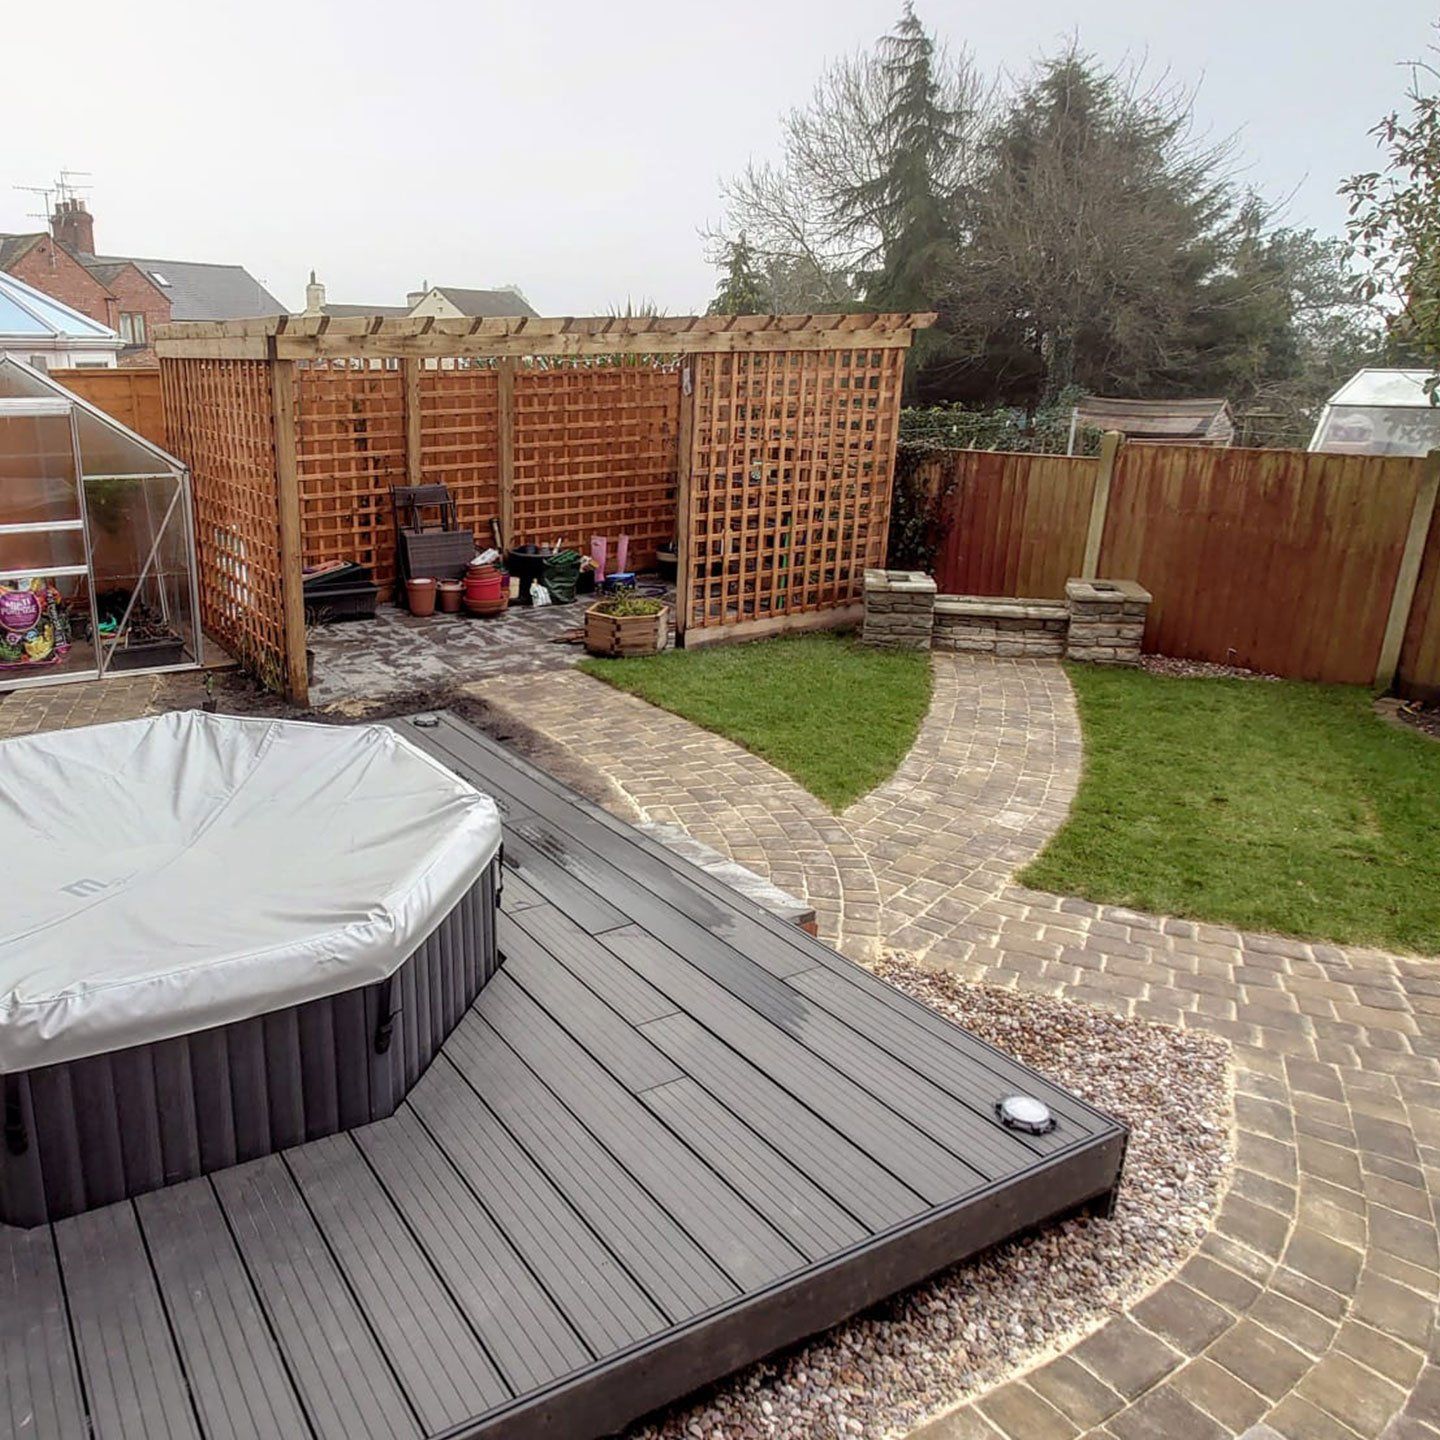 DNA Landscaping Contractor garden with composite decking in a Coventry garden